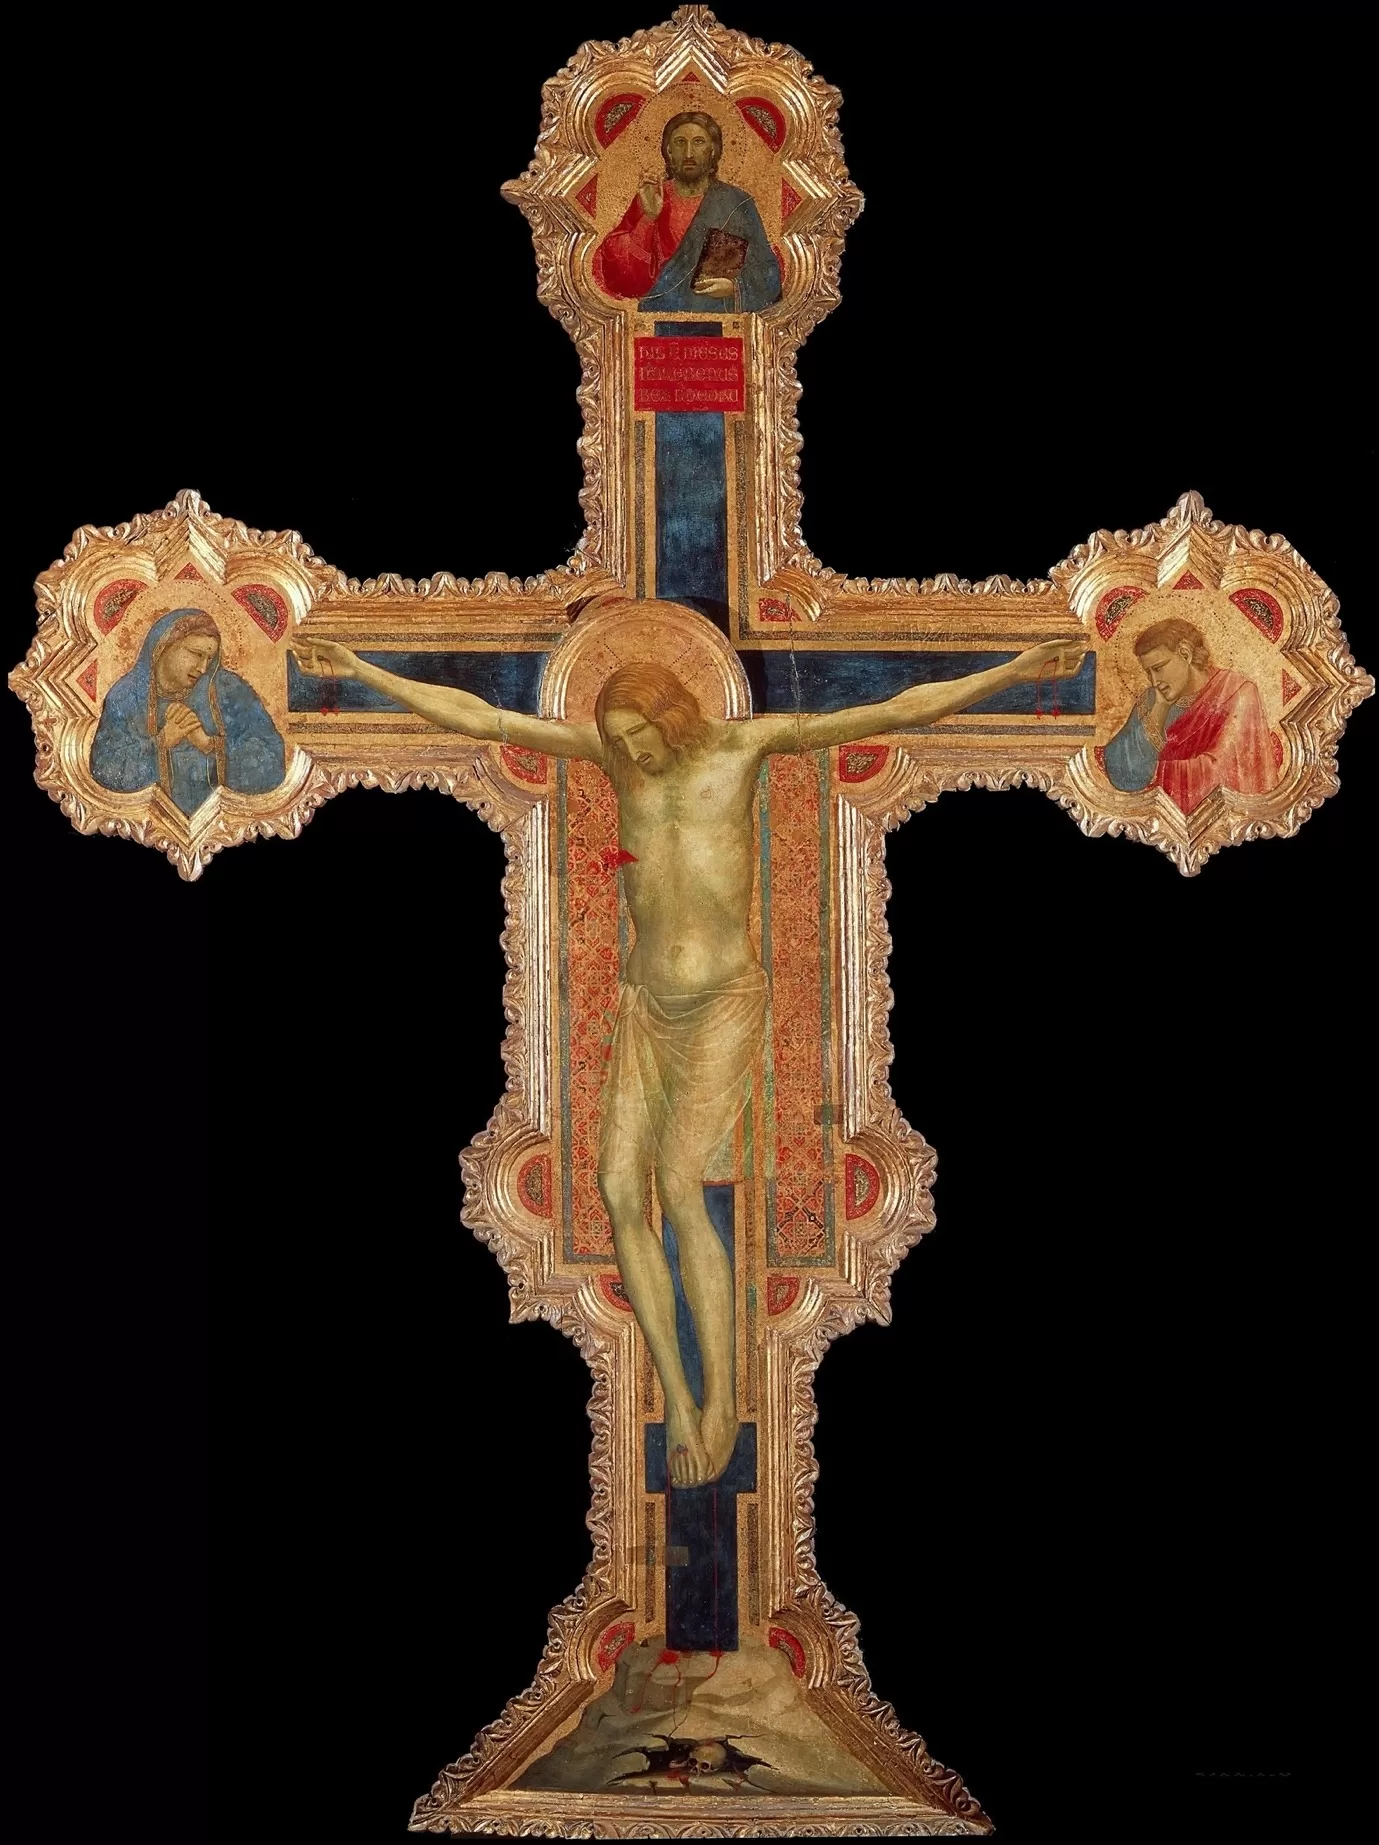 A religious cross with a crucifix Description automatically generated